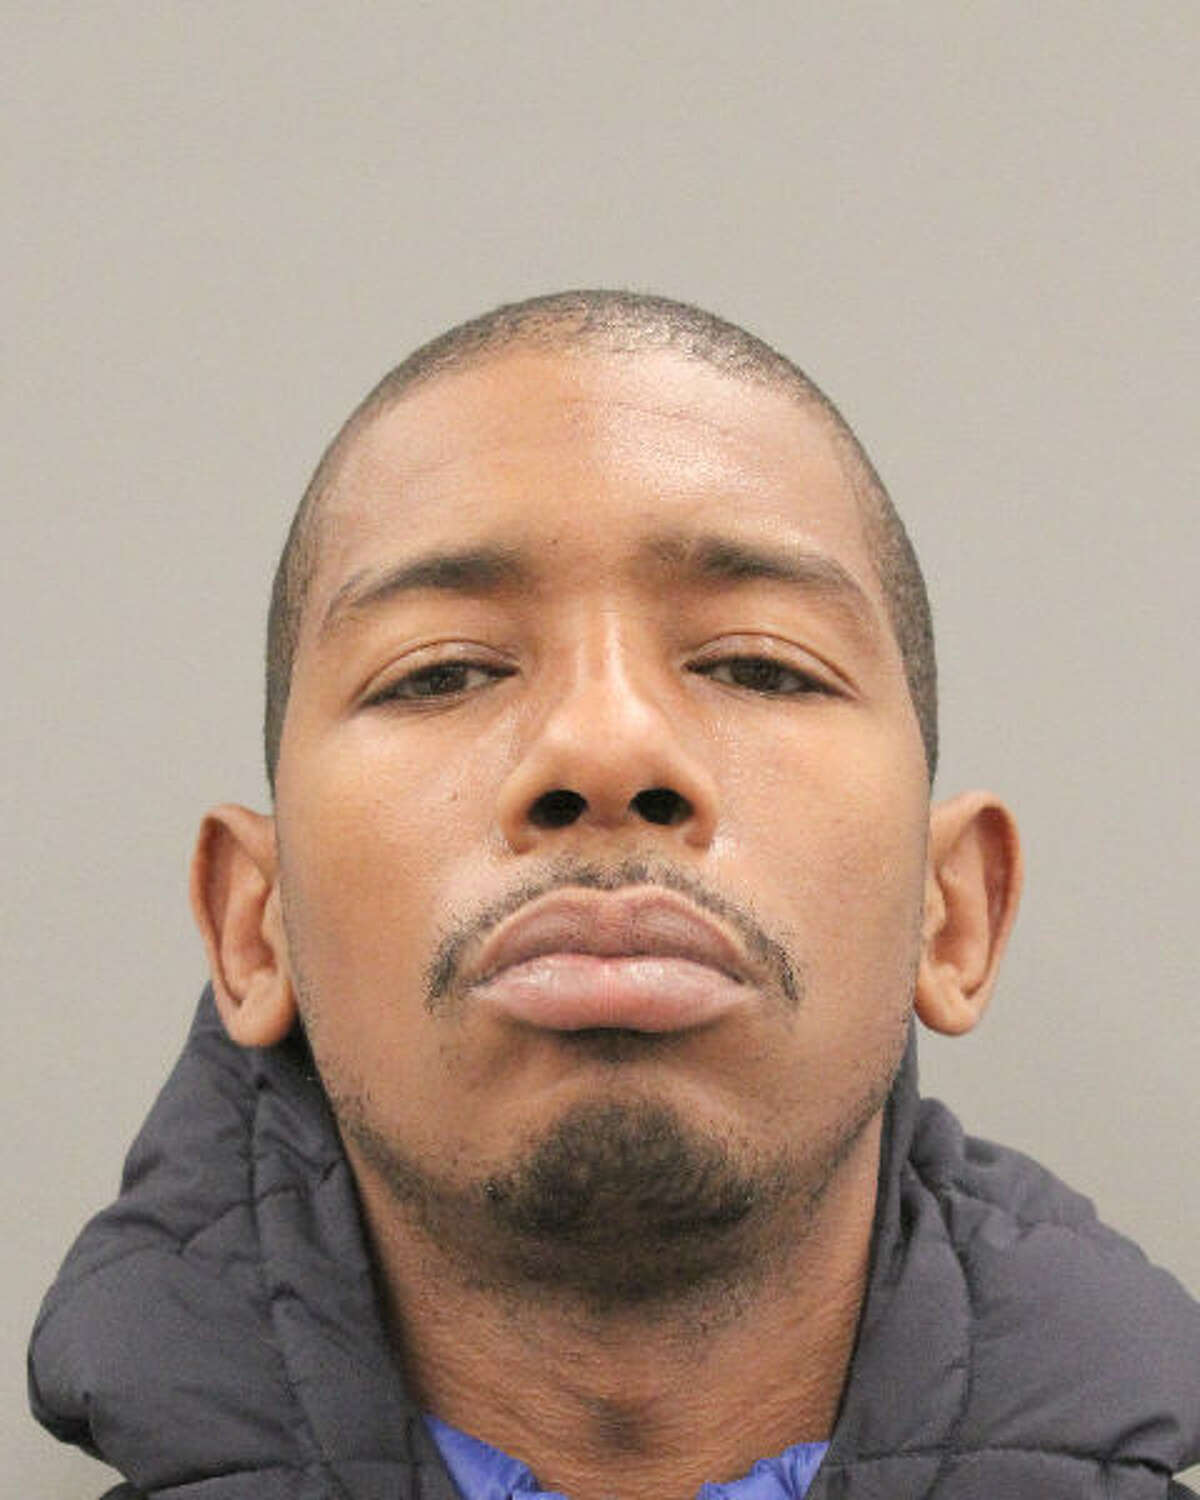 Cornelius Watson, 44, was sentenced to 80 years in prison for killing 34-year-old Jarmel Jarmon-Joiner on Sept. 12, 2020.